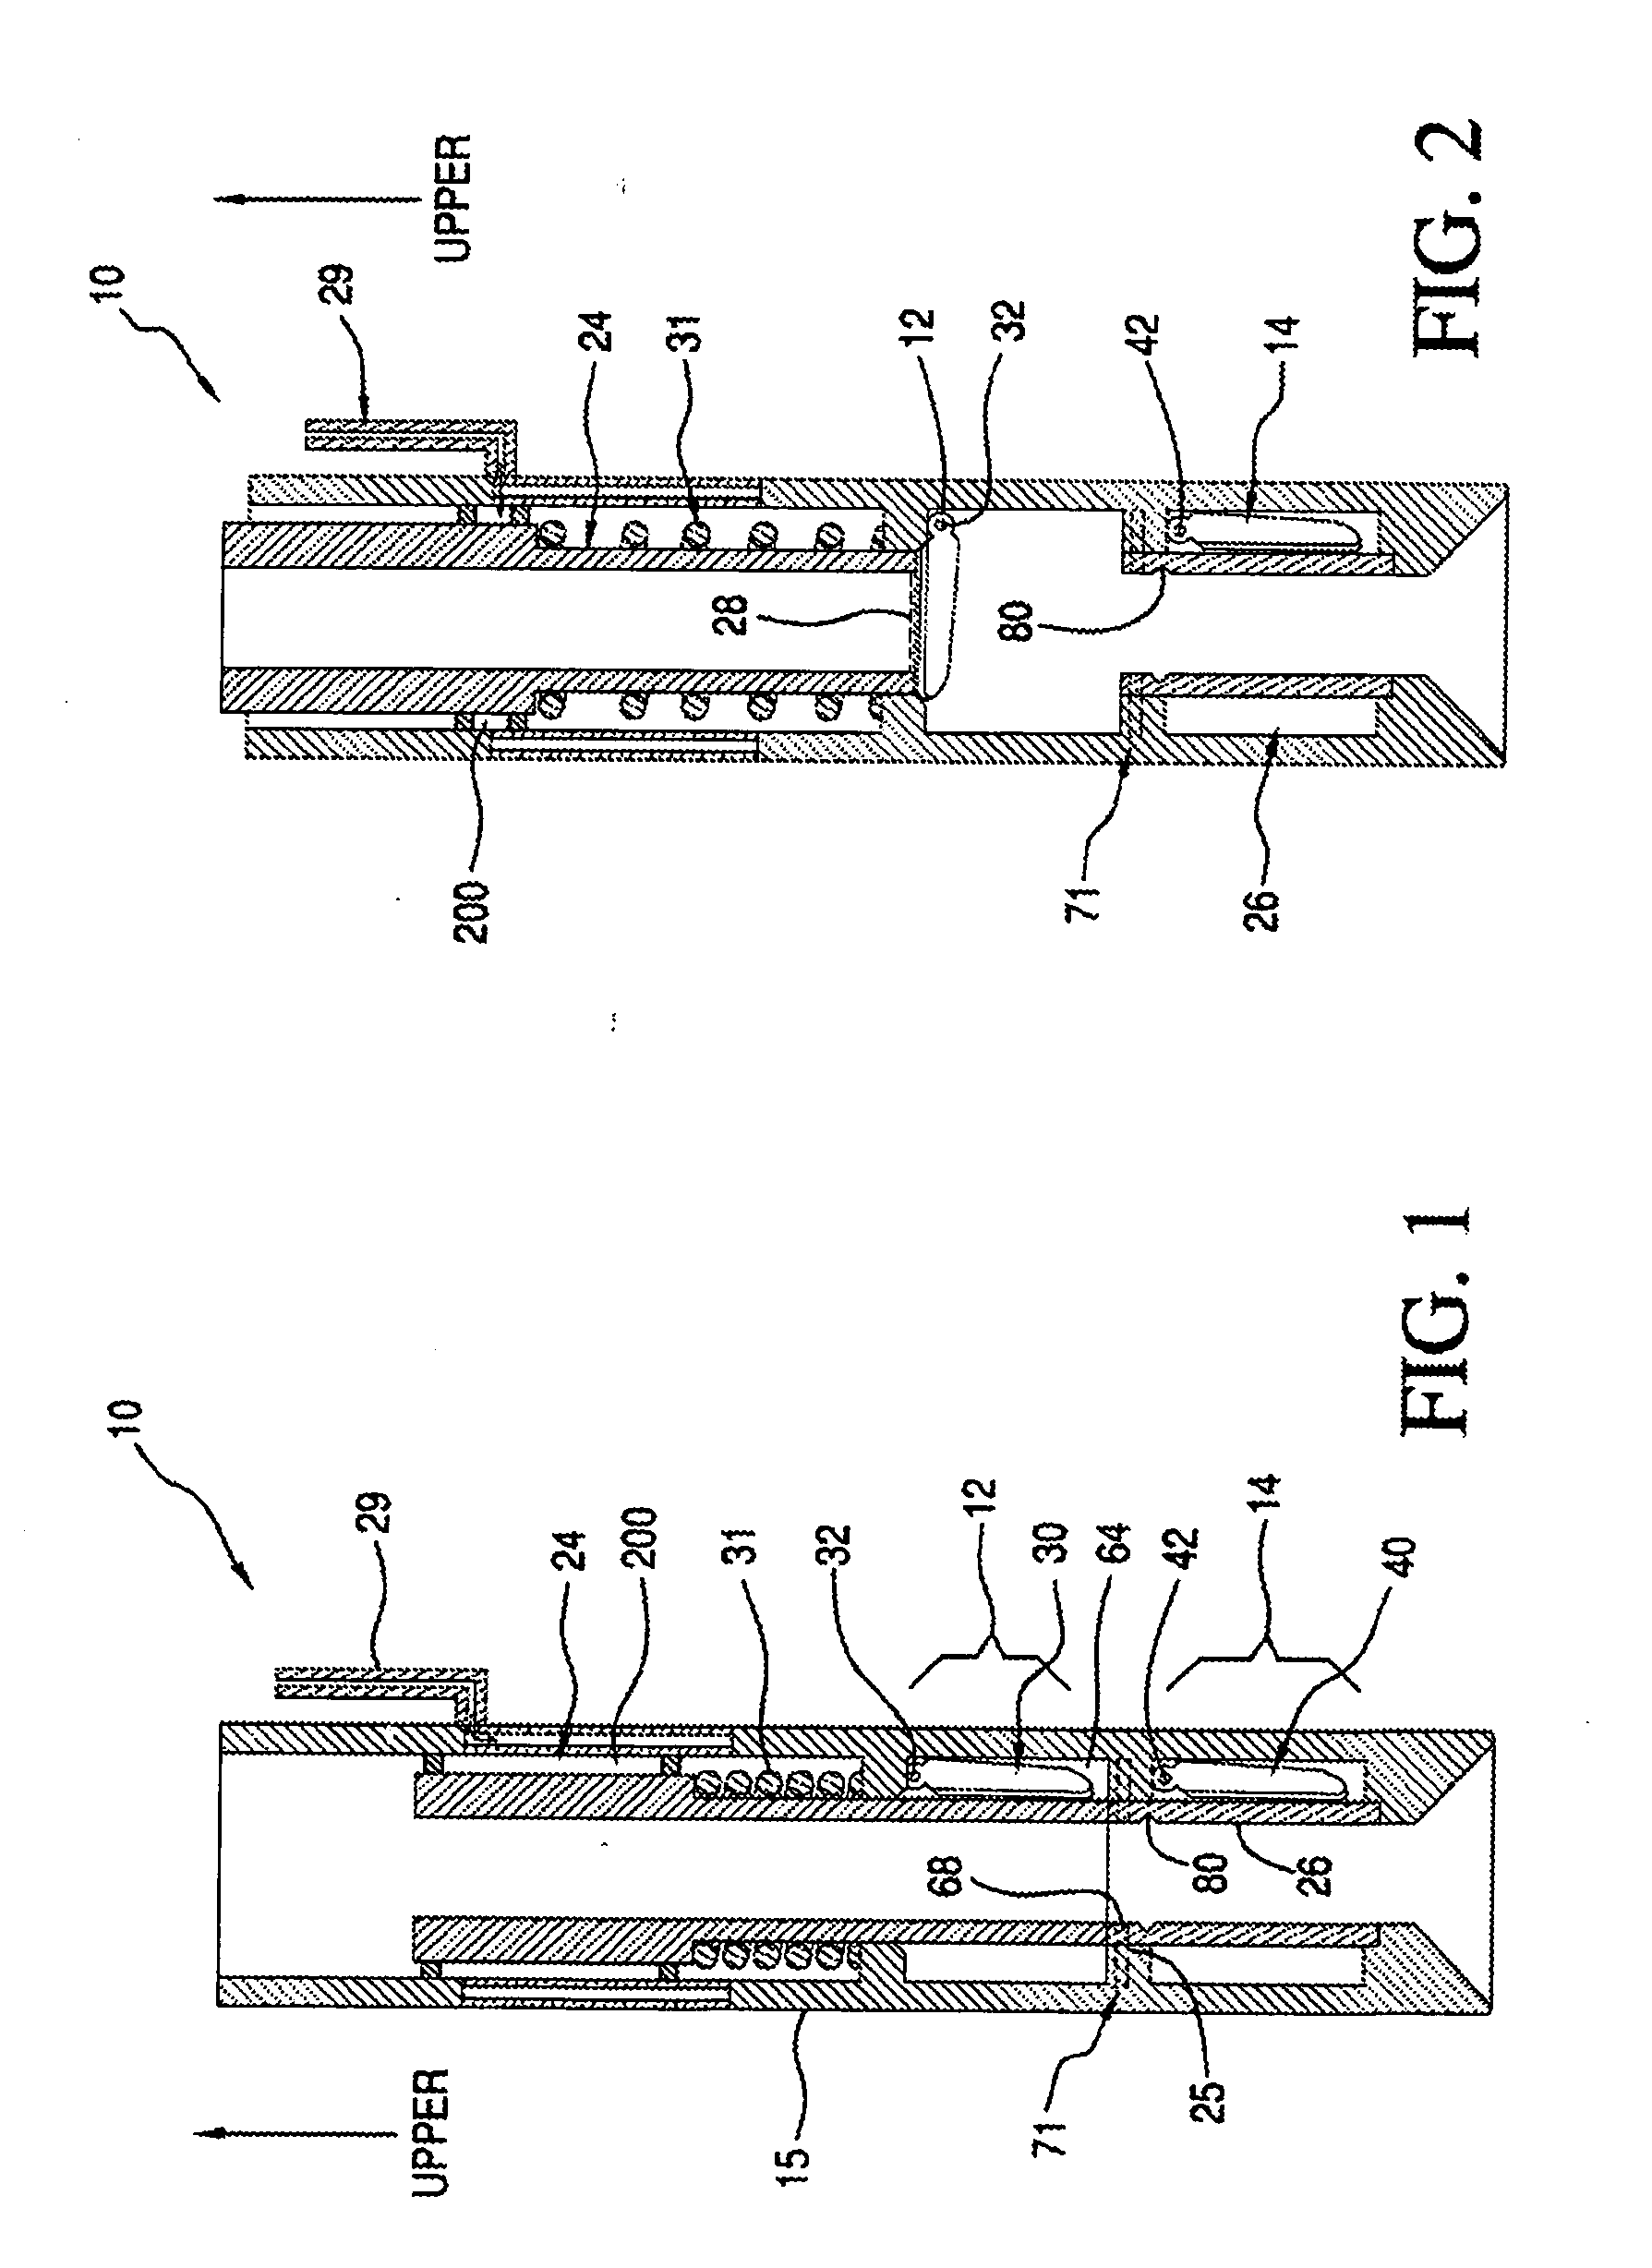 Surface controlled subsurface safety valve assembly with primary and secondary valves